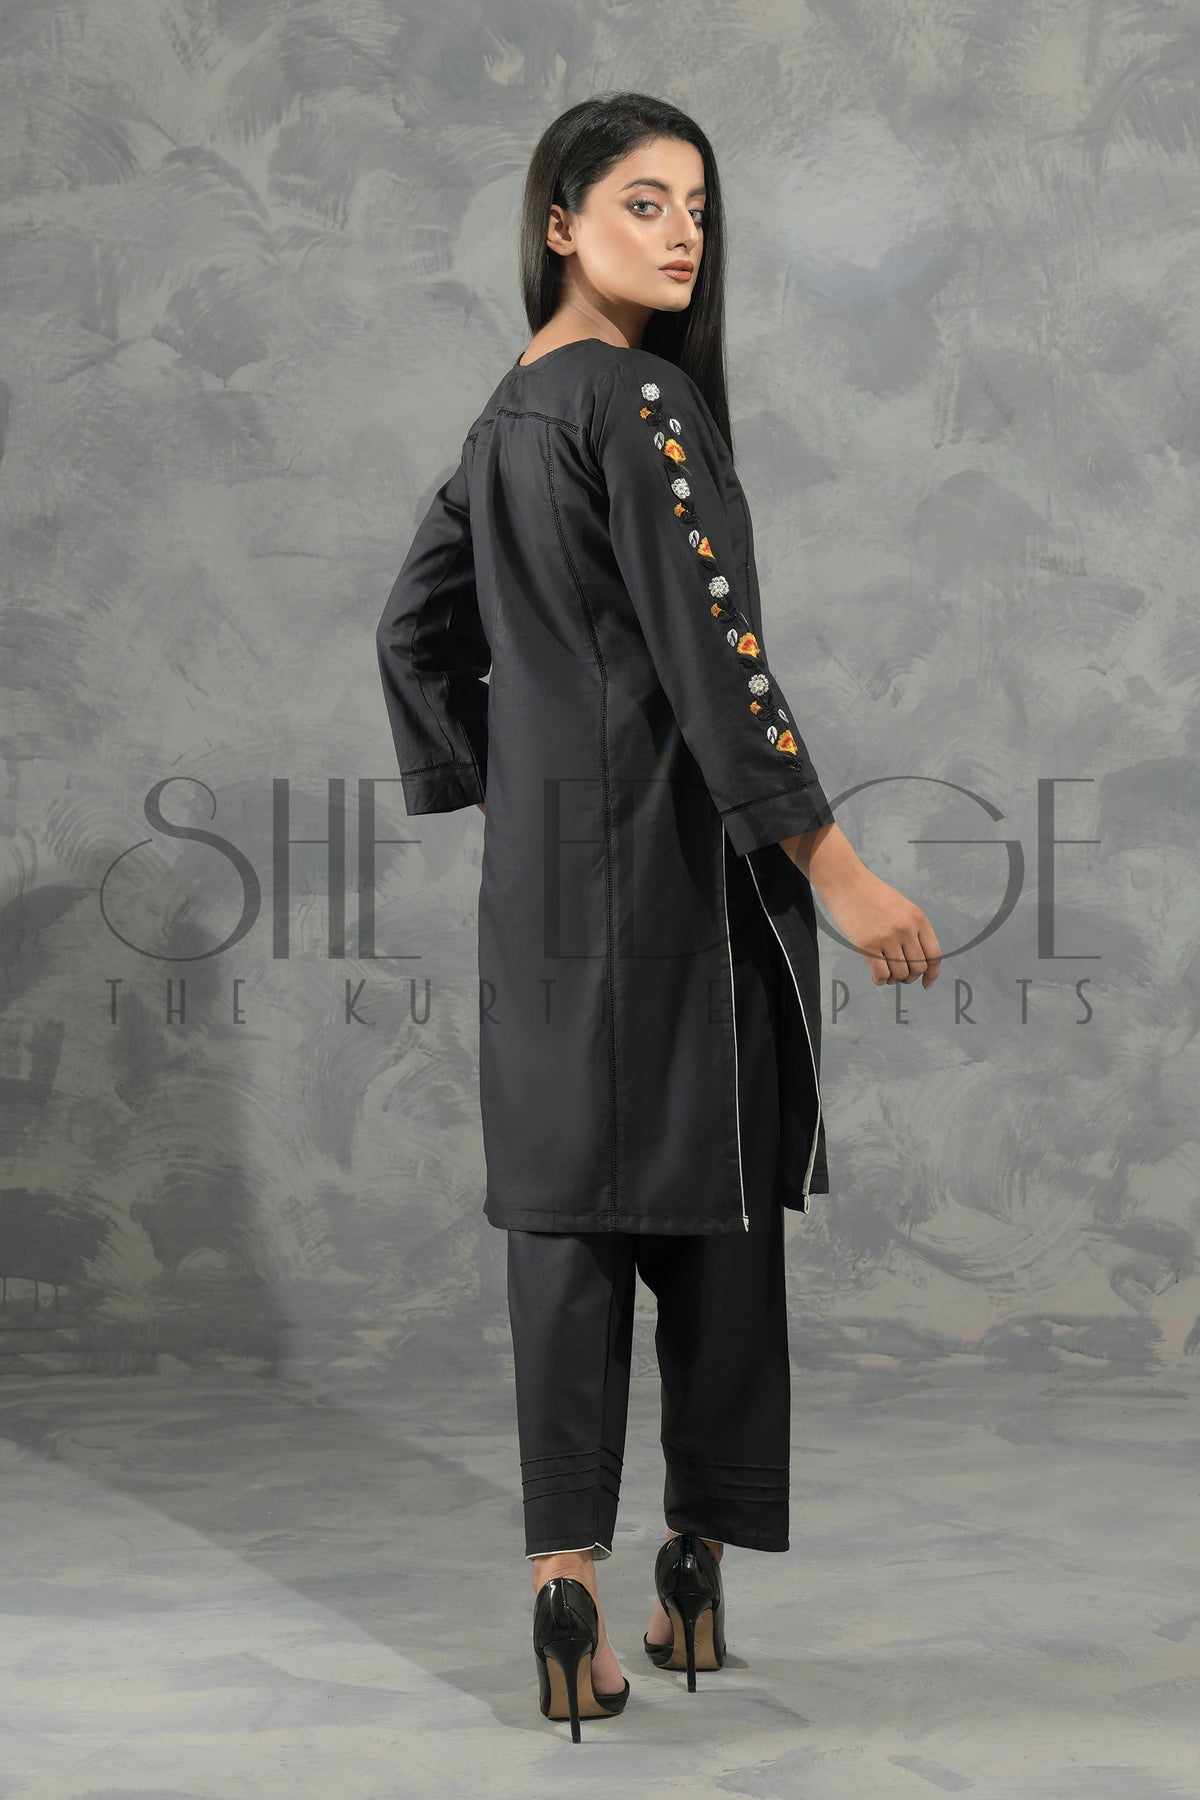 2pc Embroidered Khaddar Suit -  Winters 2022